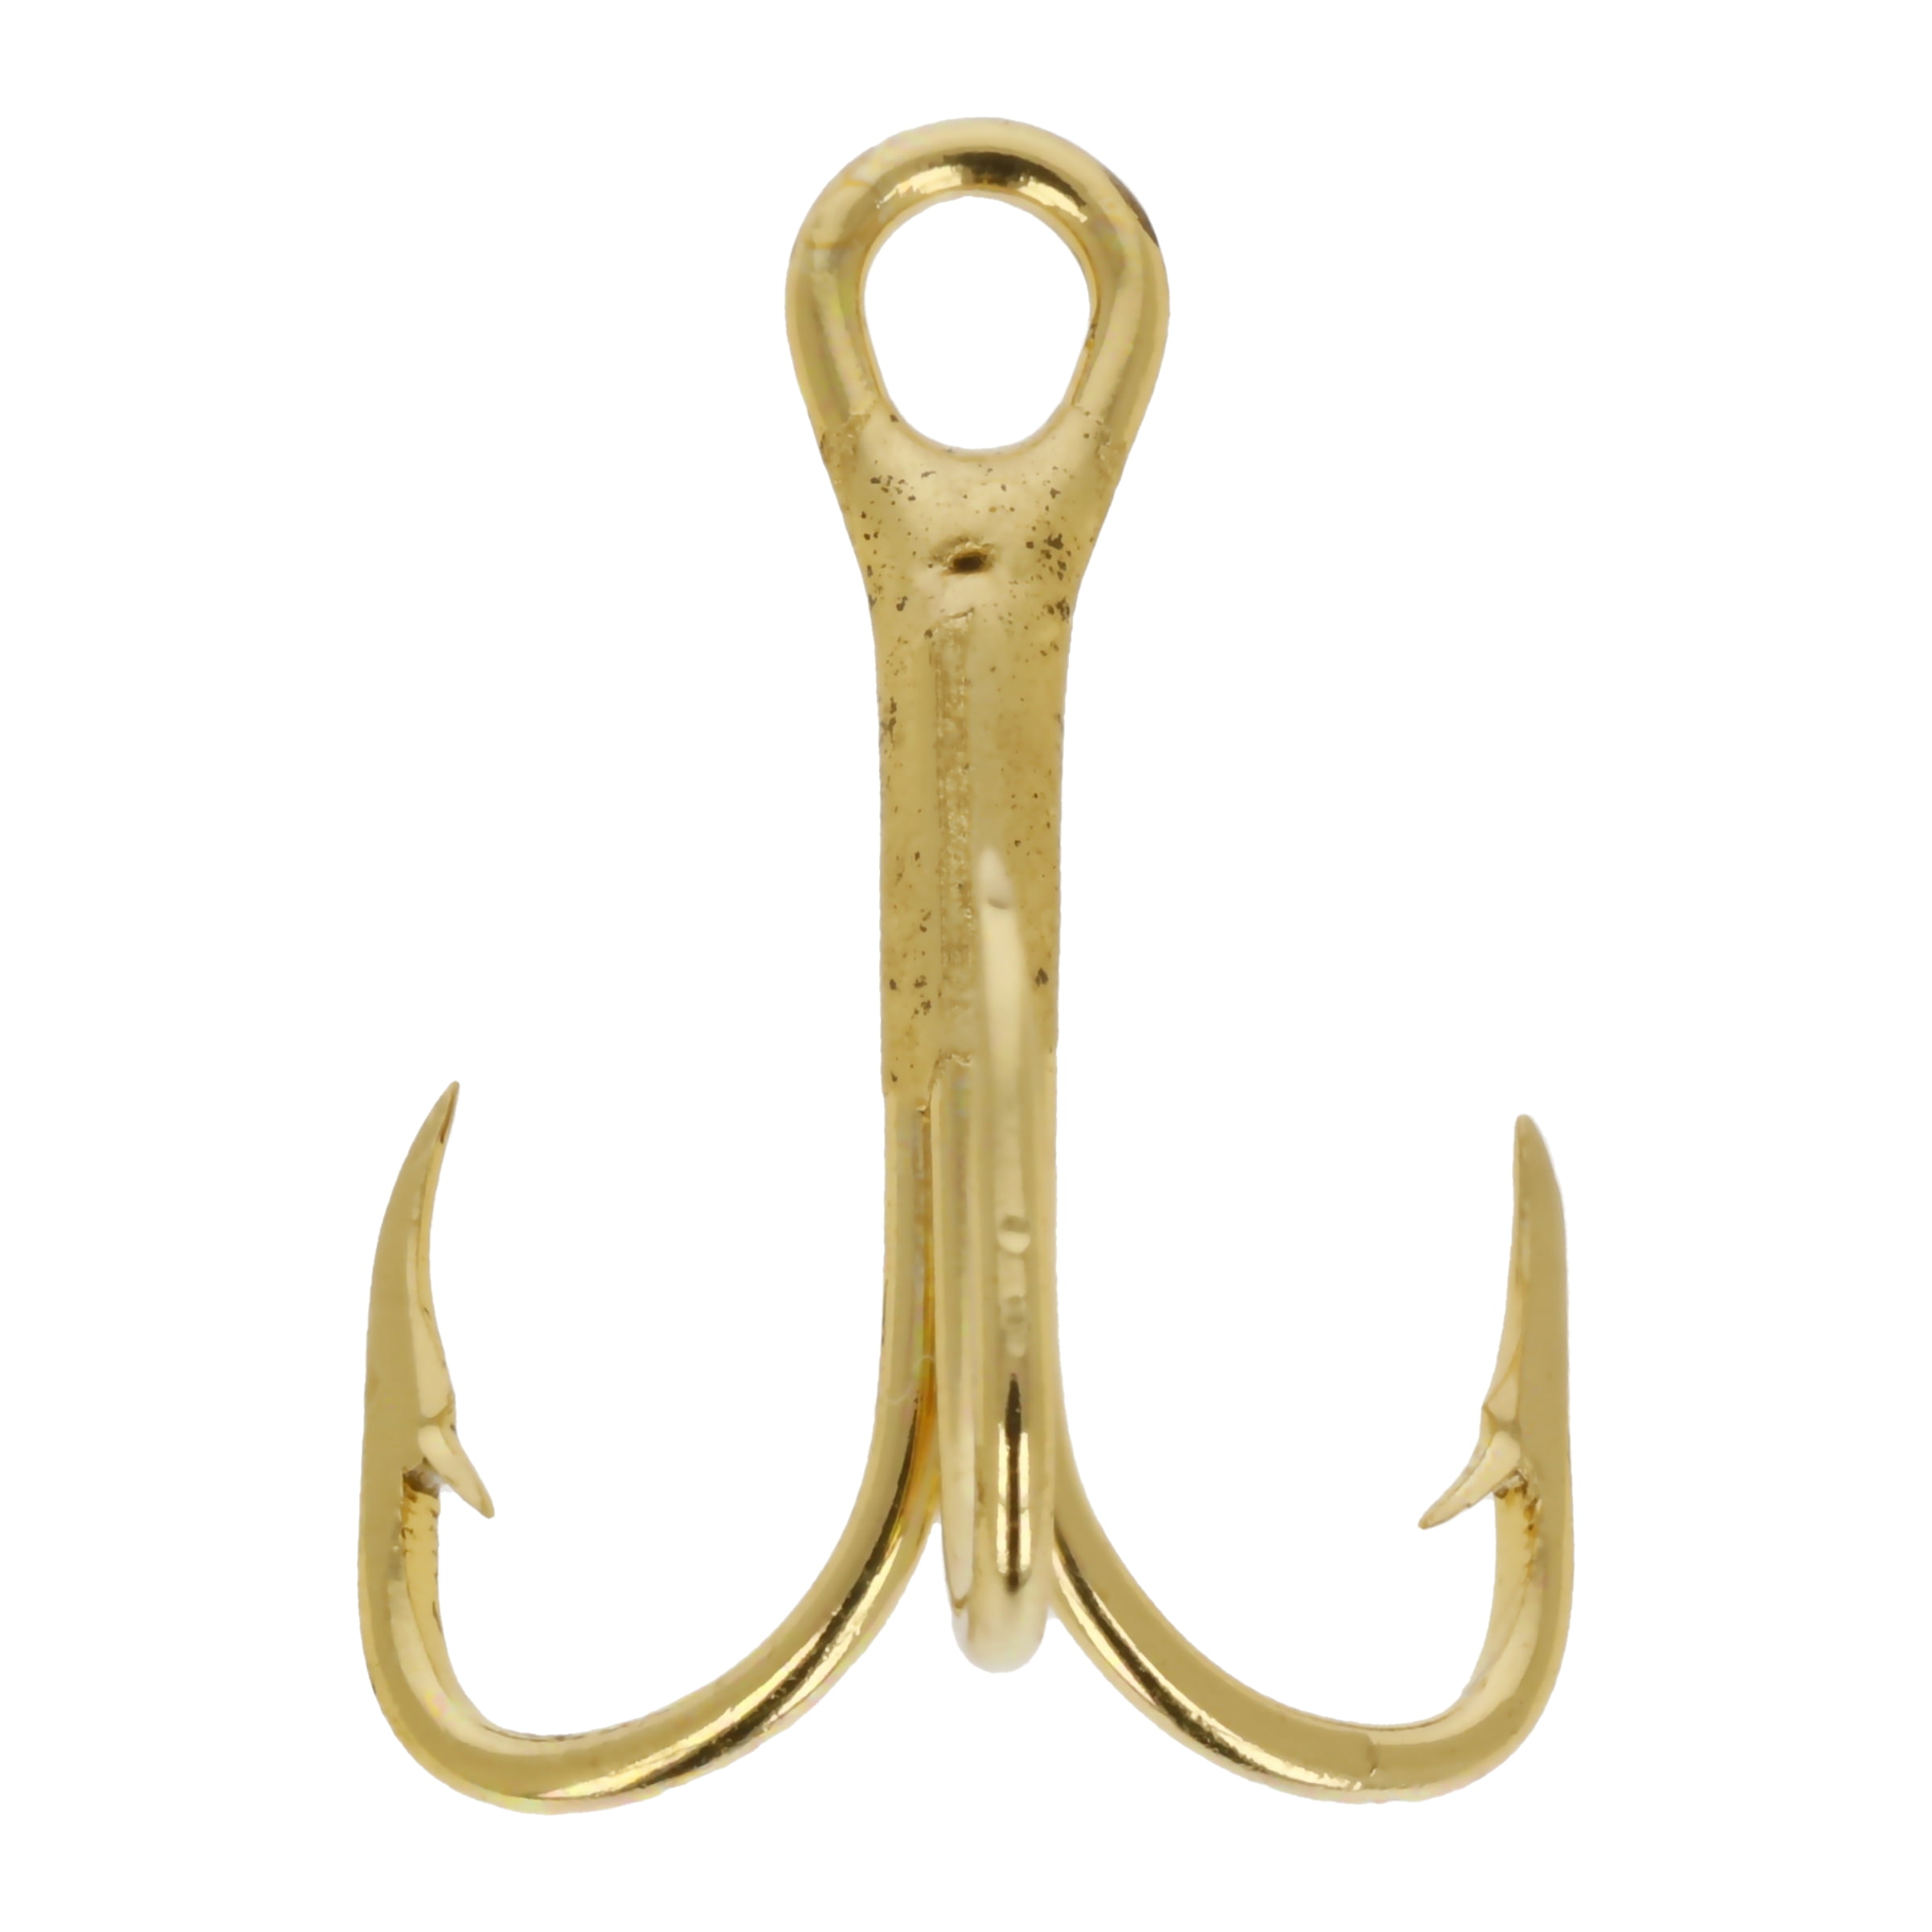 Eagle Claw 376AH-8 2X Treble Hook, Gold, Size 8, 5 Pack 